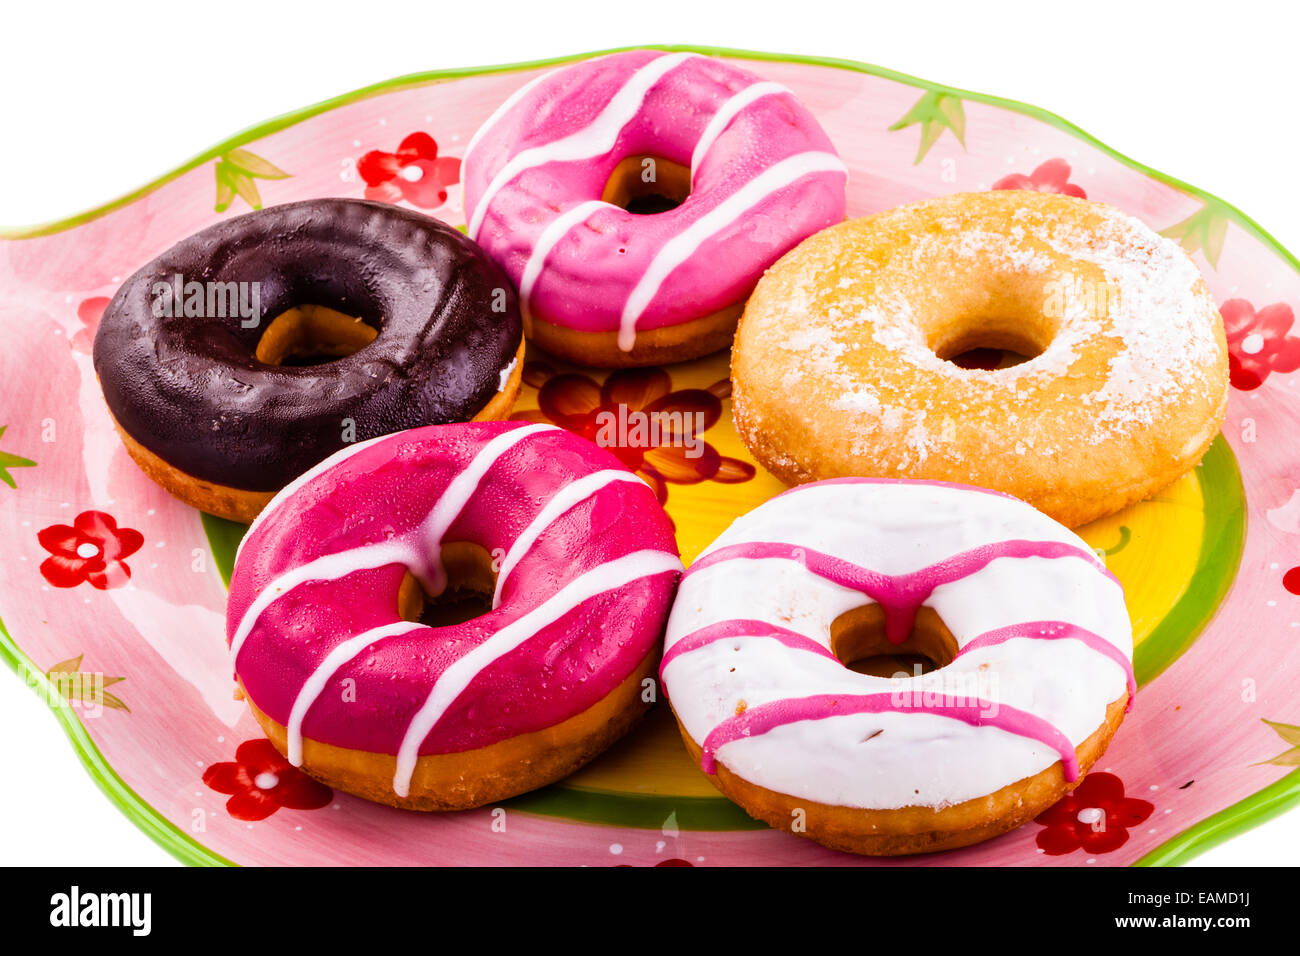 a collection of delicious and colorful donuts on a plate Stock Photo